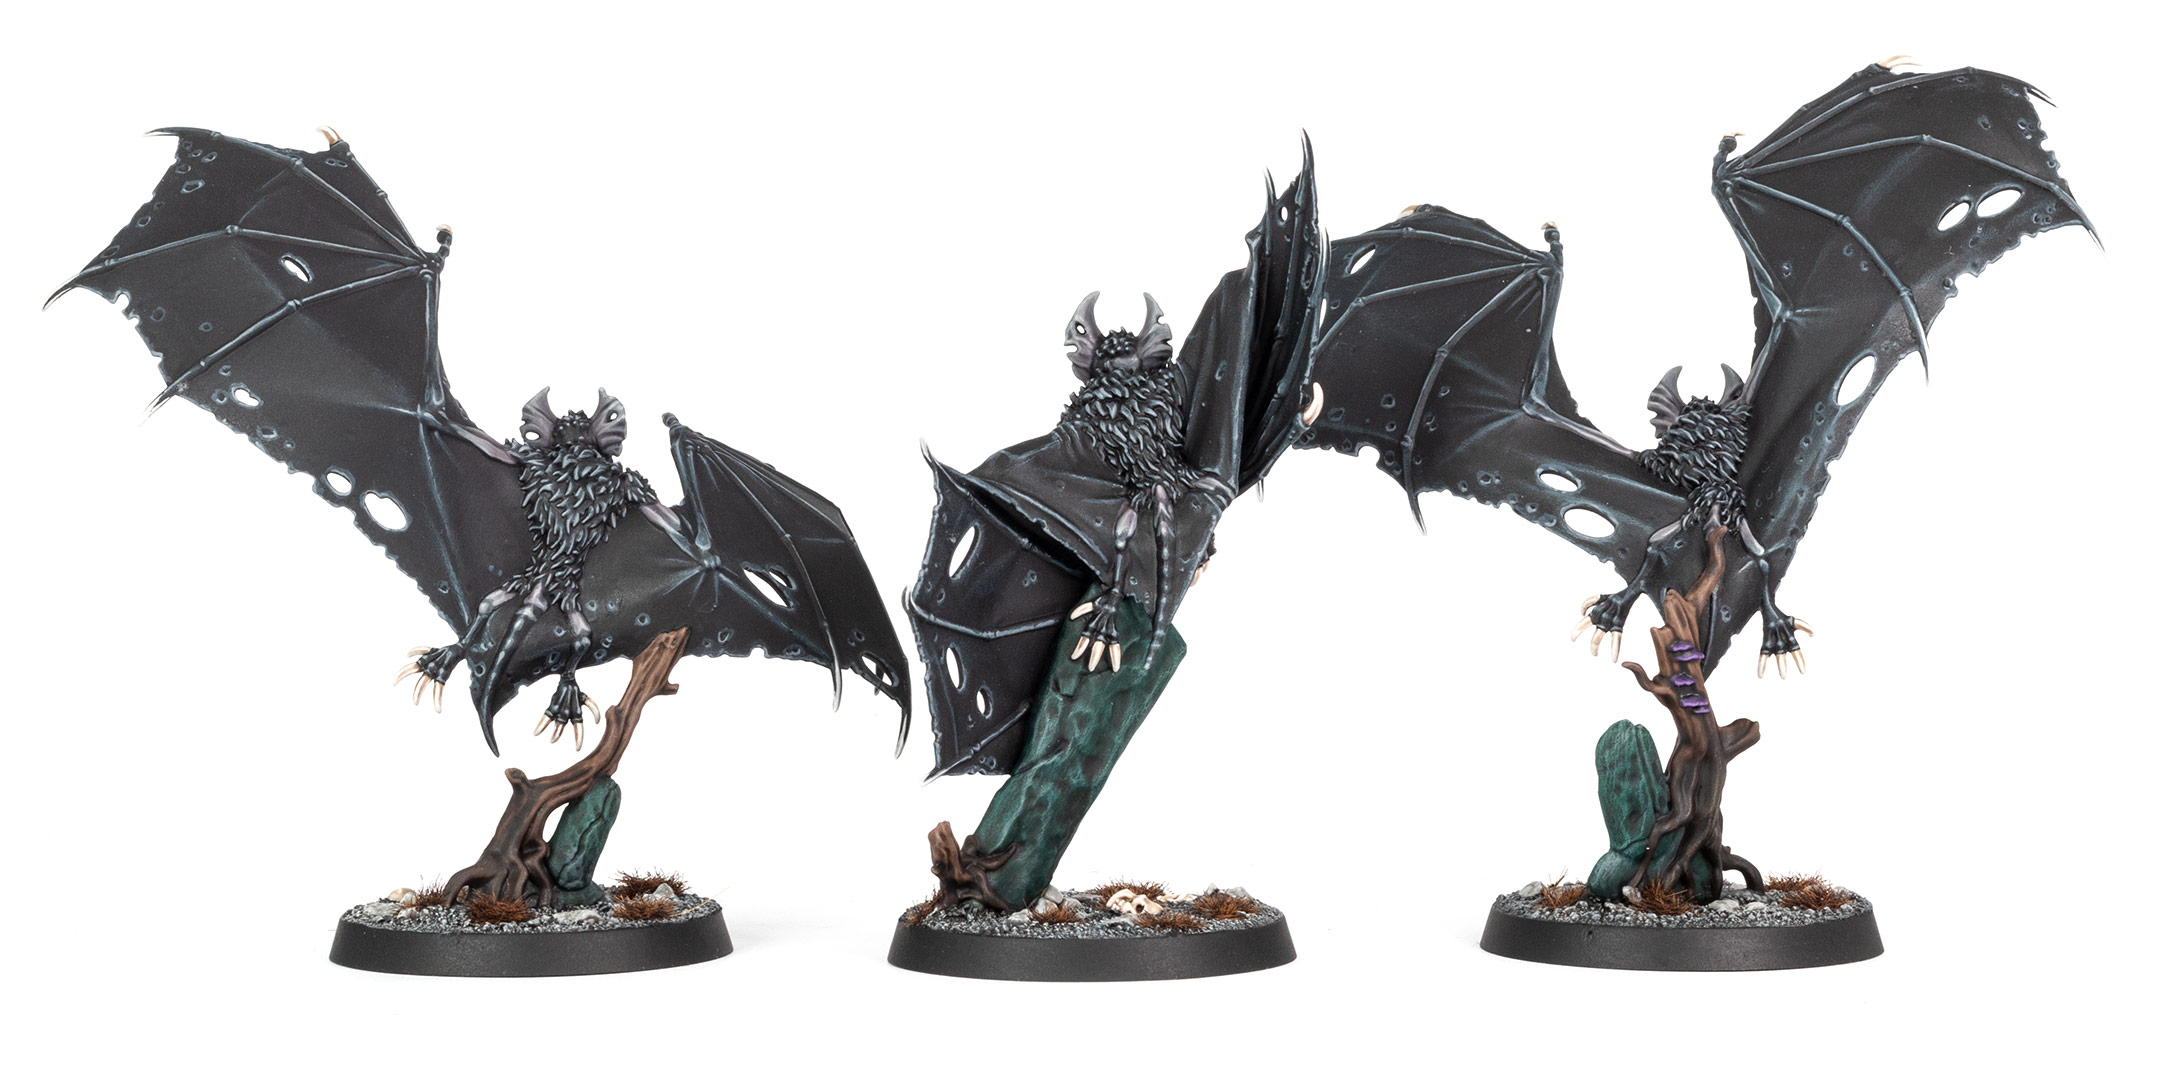 Back view of three Soulblight Gravelords Fell Bats from Warhammer Age of Sigmar, painted by Stahly